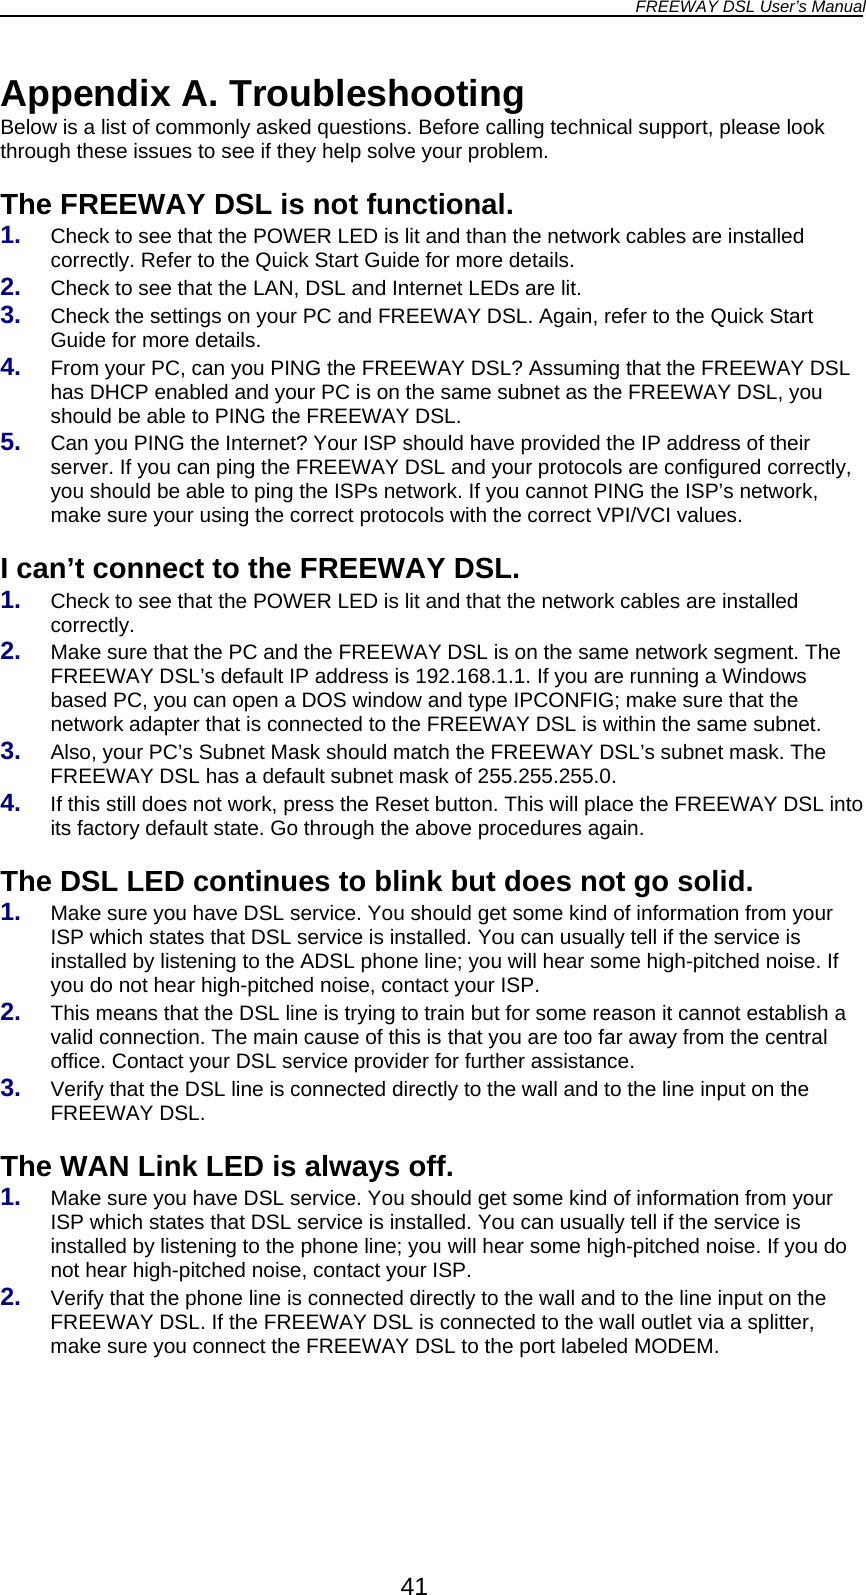 FREEWAY DSL User’s Manual  Appendix A. Troubleshooting Below is a list of commonly asked questions. Before calling technical support, please look through these issues to see if they help solve your problem.  The FREEWAY DSL is not functional. 1.  Check to see that the POWER LED is lit and than the network cables are installed correctly. Refer to the Quick Start Guide for more details. 2.  Check to see that the LAN, DSL and Internet LEDs are lit. 3.  Check the settings on your PC and FREEWAY DSL. Again, refer to the Quick Start Guide for more details. 4.  From your PC, can you PING the FREEWAY DSL? Assuming that the FREEWAY DSL has DHCP enabled and your PC is on the same subnet as the FREEWAY DSL, you should be able to PING the FREEWAY DSL. Can you PING the Internet? Your ISP should have provided the IP address of their server. If you can ping the FREEWAY DSL and your protocols are configured correctly, you should be able to ping the ISPs network. If you cannot PING the ISP’s ne5. twork, make sure your using the correct protocols with the correct VPI/VCI values. 1.  ee that the POWER LED is lit and that the network cables are installed 2.  he  .  e FREEWAY DSL into 1. 2.  l .  Verify that the DSL line is connected directly to the wall and to the line input on the e1.  ou can usually tell if the service is   2.  put on the FREEWAY DSL. If the FREEWAY DSL is connected to the wall outlet via a splitter, make sure you connect the FREEWAY DSL to the port labeled MODEM.  I can’t connect to the FREEWAY DSL. Check to scorrectly. Make sure that the PC and the FREEWAY DSL is on the same network segment. TFREEWAY DSL’s default IP address is 192.168.1.1. If you are running a Windowsbased PC, you can open a DOS window and type IPCONFIG; make sure that the network adapter that is connected to the FREEWAY DSL is within the same subnet. Also, your PC’s Subnet Mask should match the FREEWAY DS3.  L’s subnet mask. The FREEWAY DSL has a default subnet mask of 255.255.255.0. If this still does not work, press the Reset button. This will place th4its factory default state. Go through the above procedures again.  The DSL LED continues to blink but does not go solid. Make sure you have DSL service. You should get some kind of information from your ISP which states that DSL service is installed. You can usually tell if the service is installed by listening to the ADSL phone line; you will hear some high-pitched noise. If you do not hear high-pitched noise, contact your ISP. This means that the DSL line is trying to train but for some reason it cannot establish a valid connection. The main cause of this is that you are too far away from the centraoffice. Contact your DSL service provider for further assistance. 3FREEWAY DSL.  Th  WAN Link LED is always off. Make sure you have DSL service. You should get some kind of information from your ISP which states that DSL service is installed. Yinstalled by listening to the phone line; you will hear some high-pitched noise. If you donot hear high-pitched noise, contact your ISP. Verify that the phone line is connected directly to the wall and to the line in41 